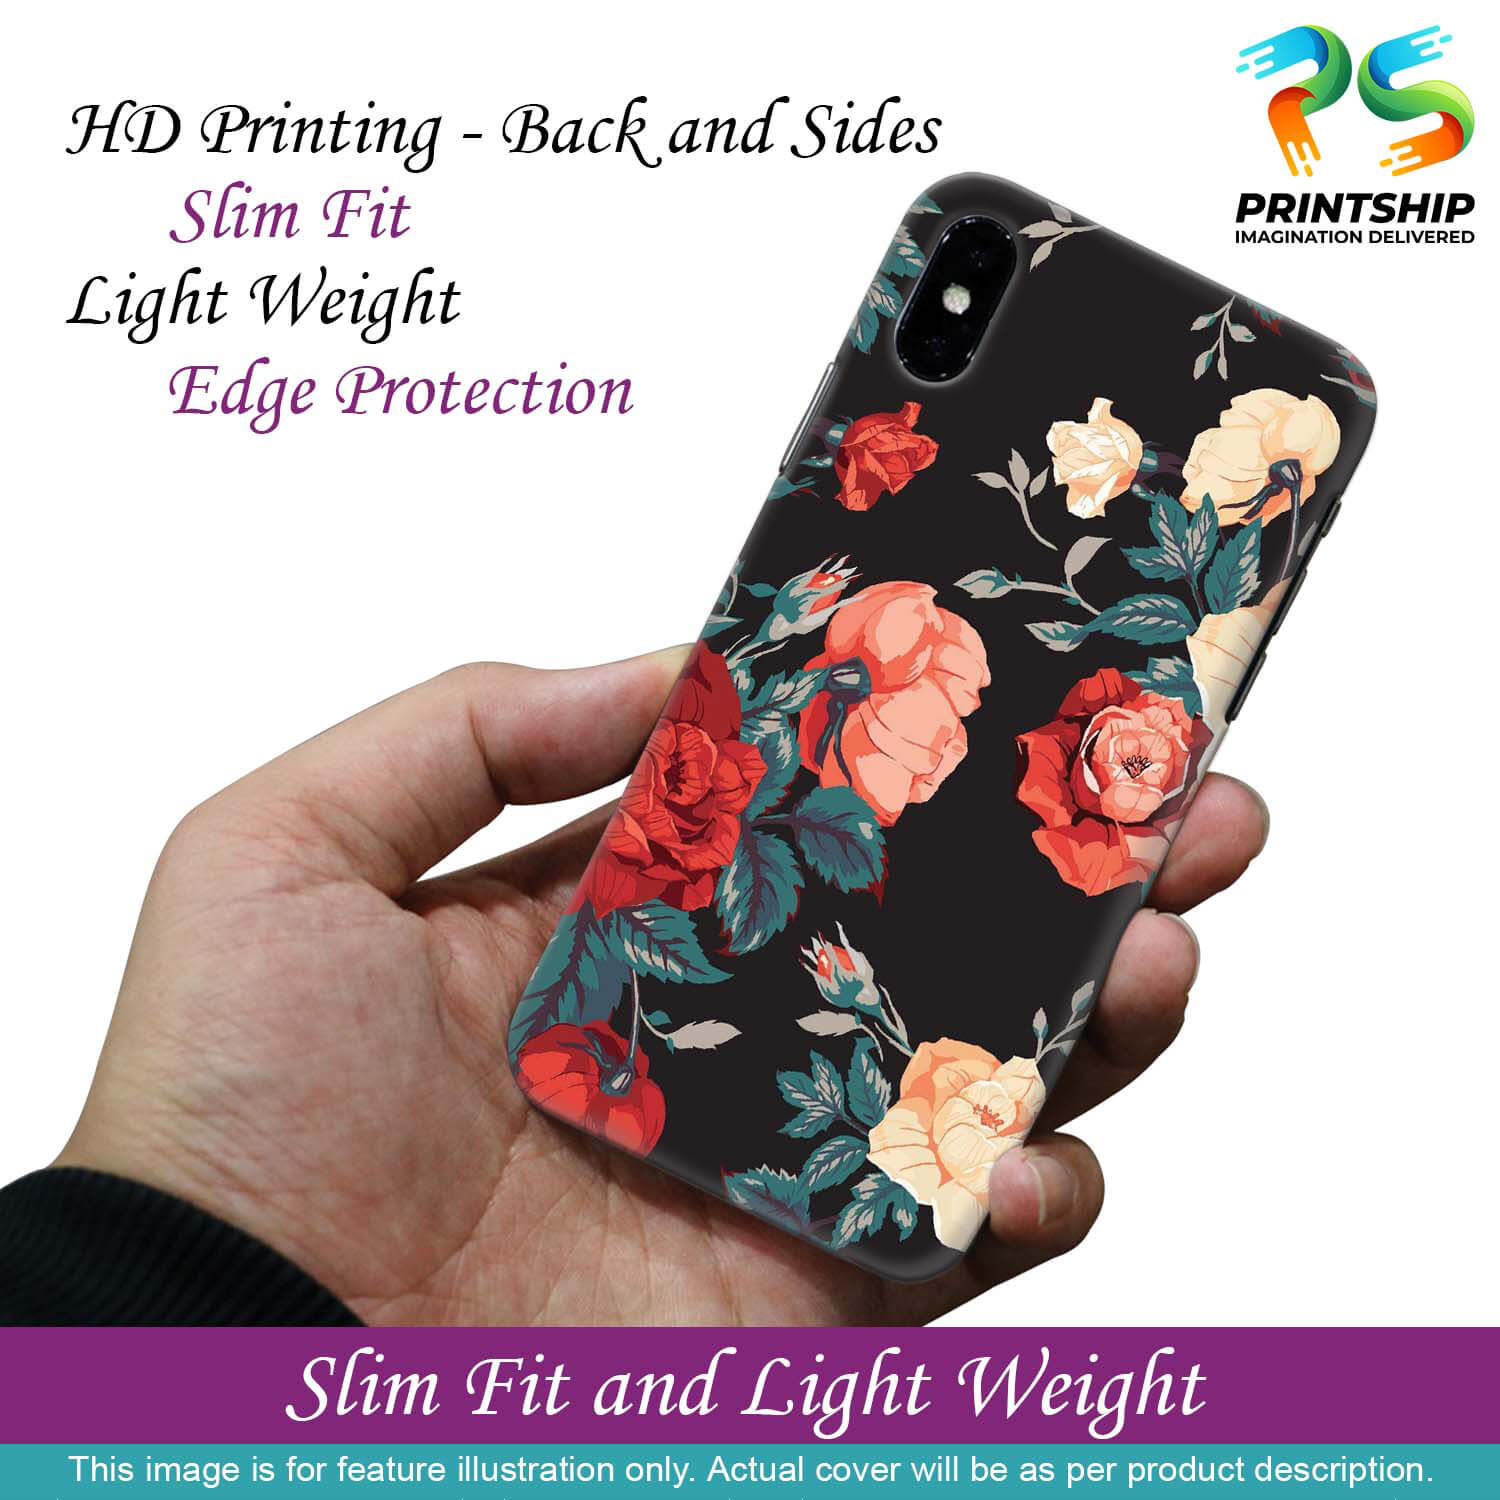 PS1340-Premium Flowers Back Cover for OnePlus 8 Pro